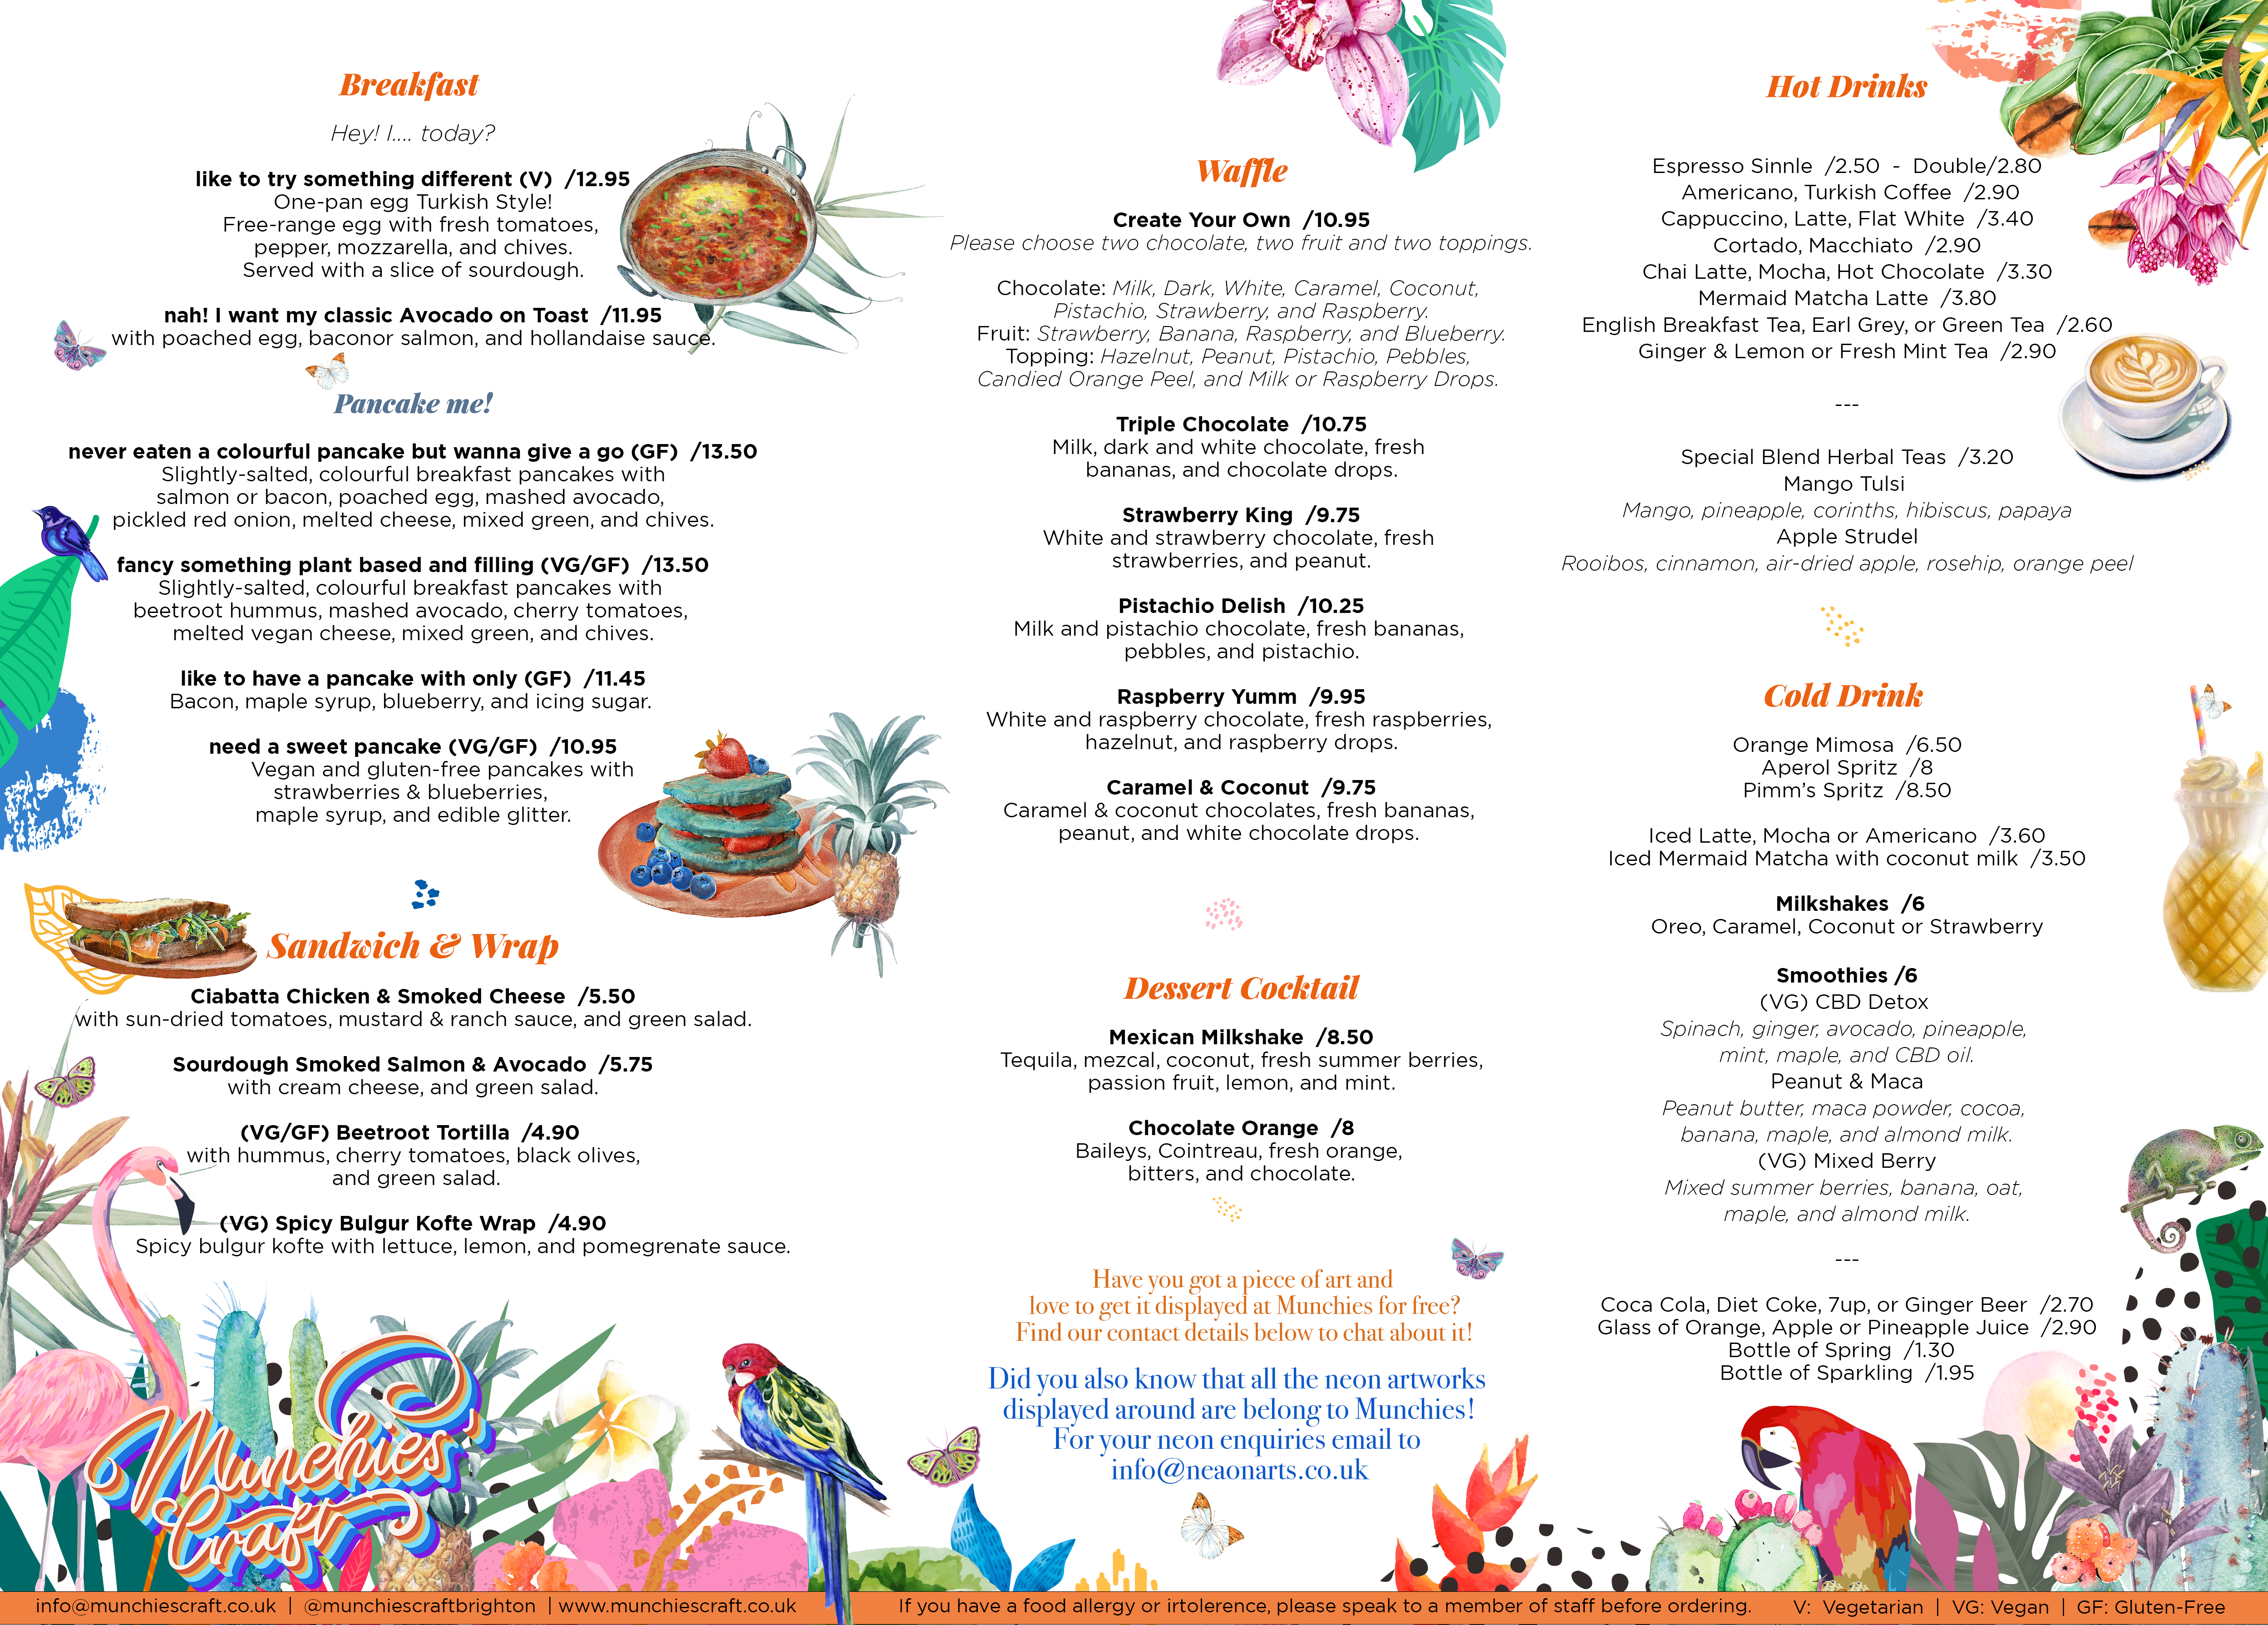 Munchies' Craft Brighton cafe breakfast and lunch menu